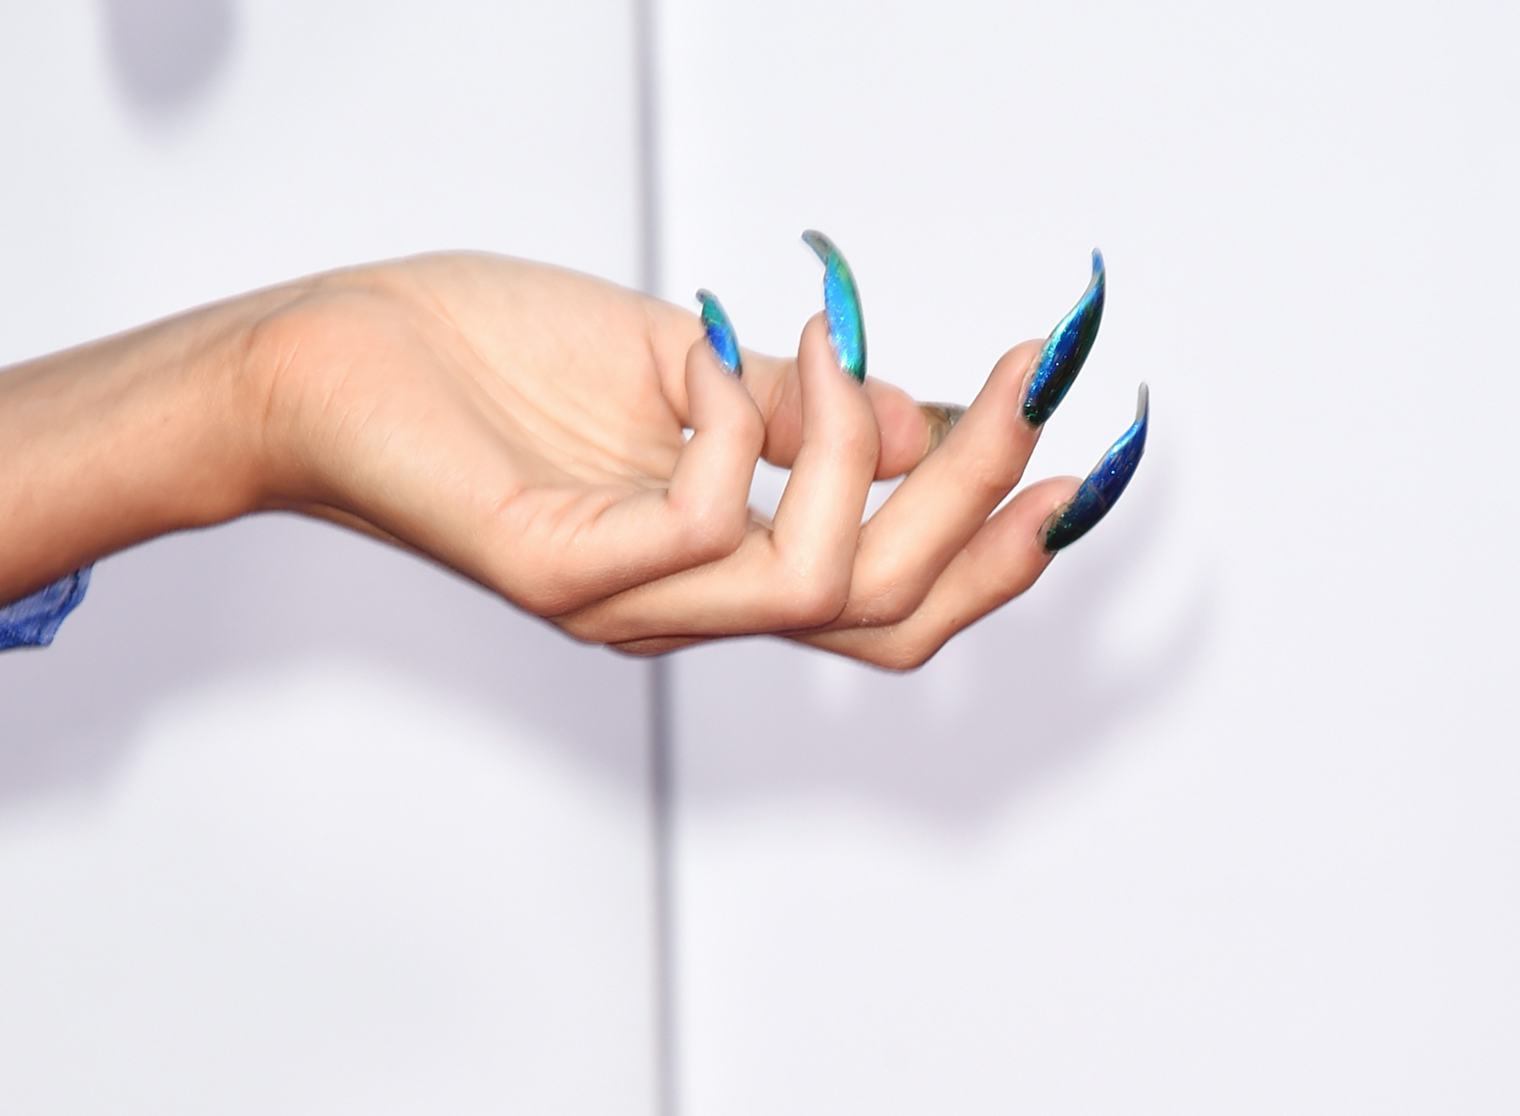 13 Things You Should Never Do To Your Nails If You Want Those Talons In Tip Top Shape